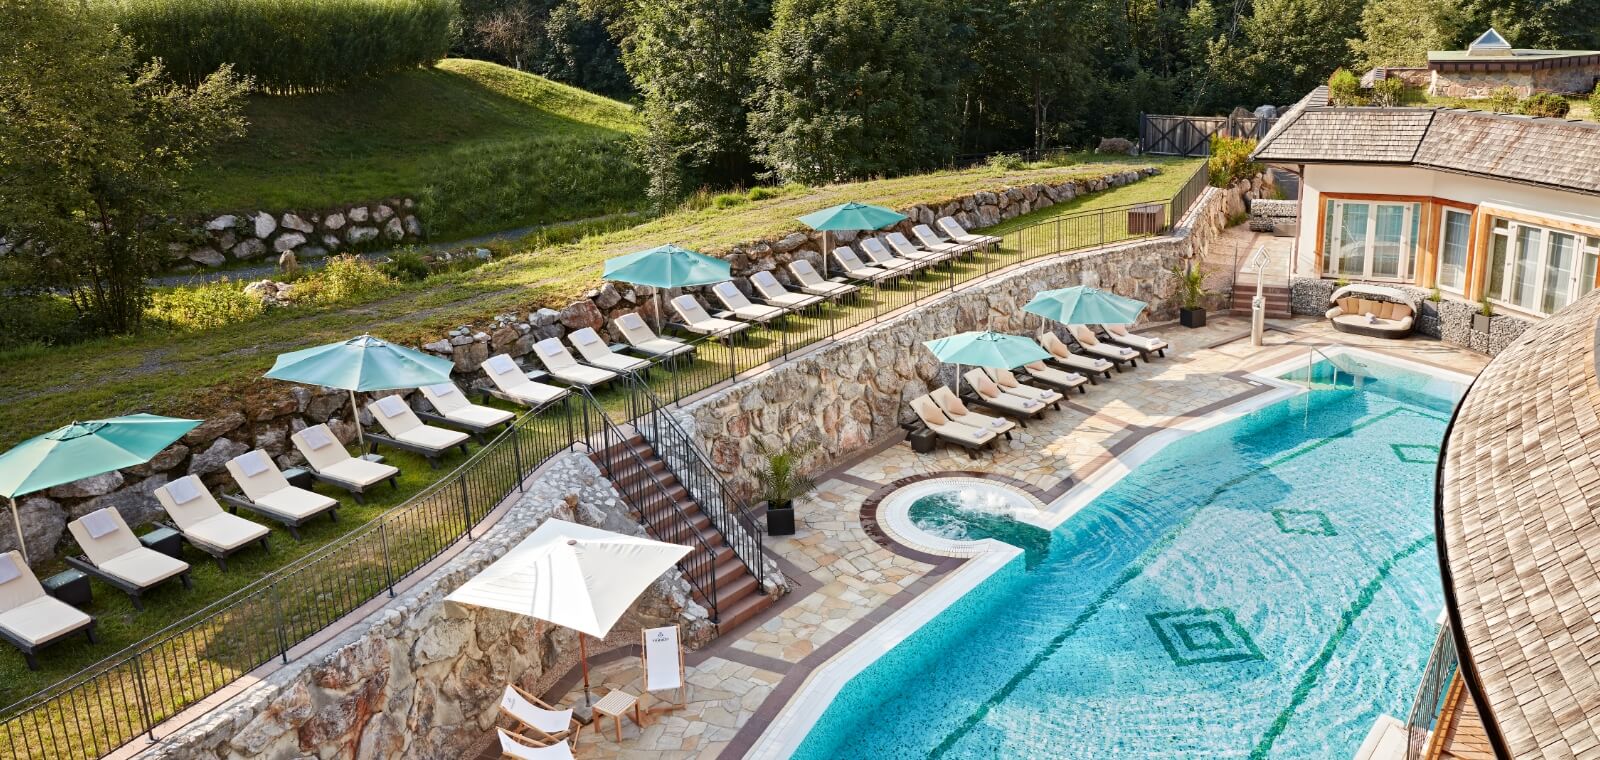 The pool and loungers in the outdoor area of the 5 star wellness hotel